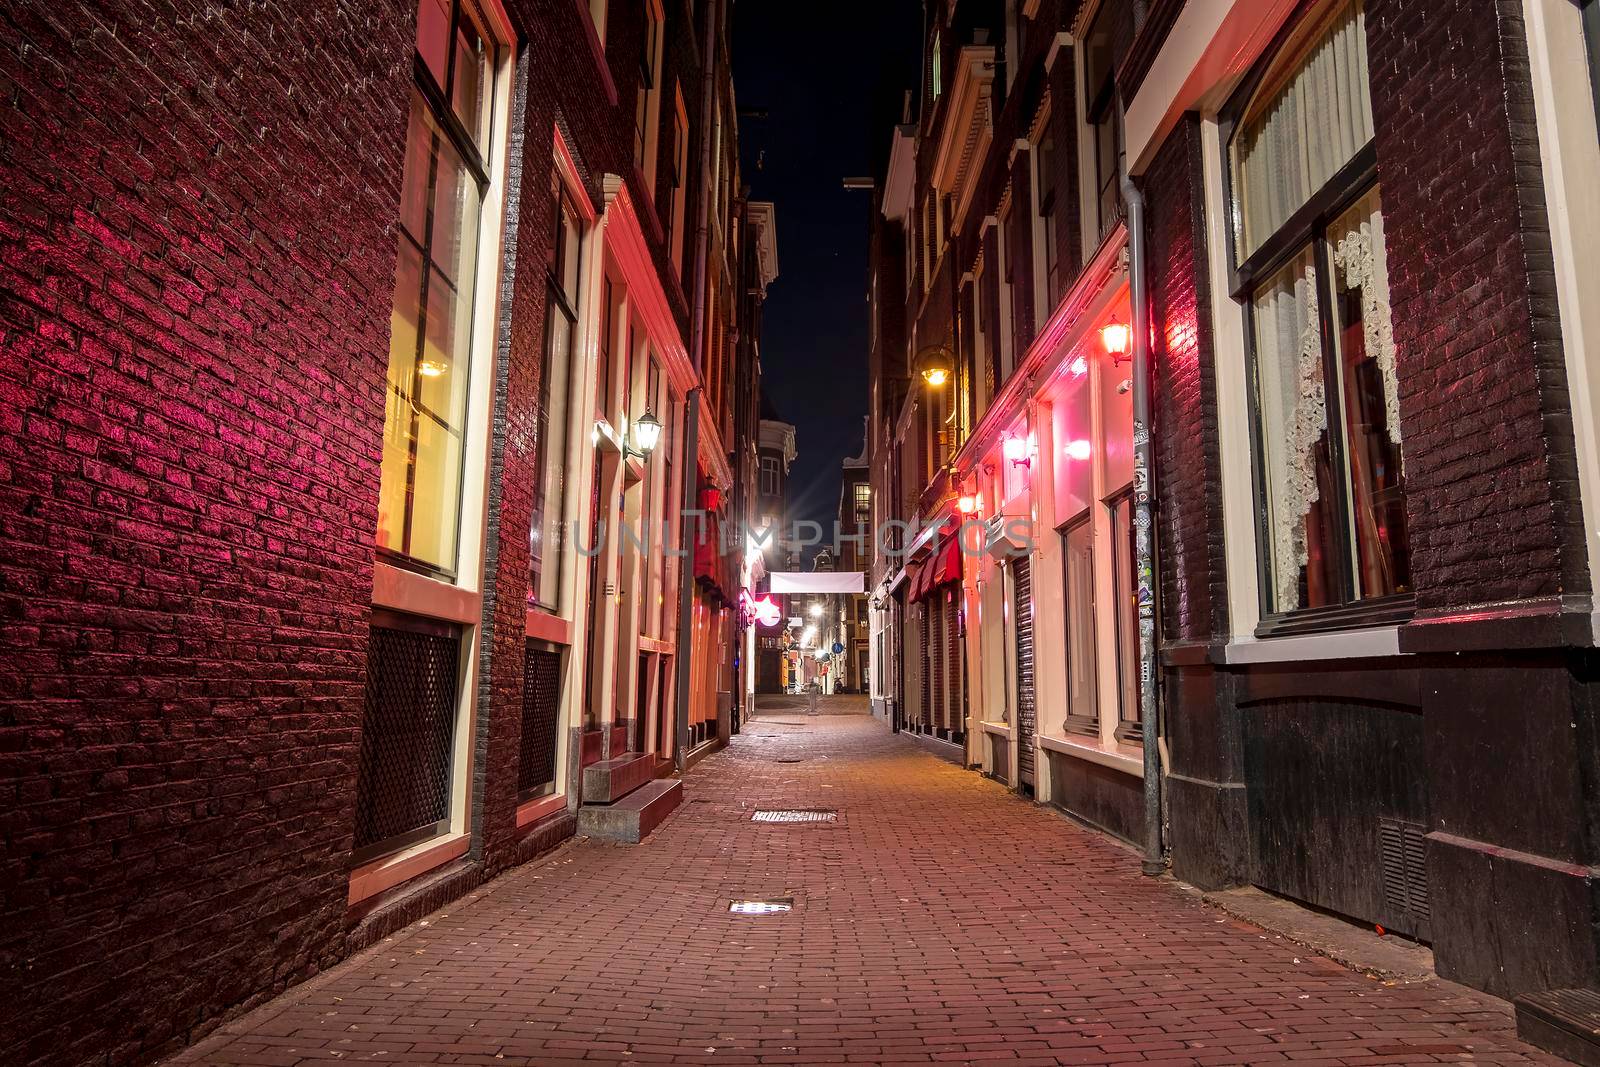 Red light district in Amsterdam the Netherlands by night